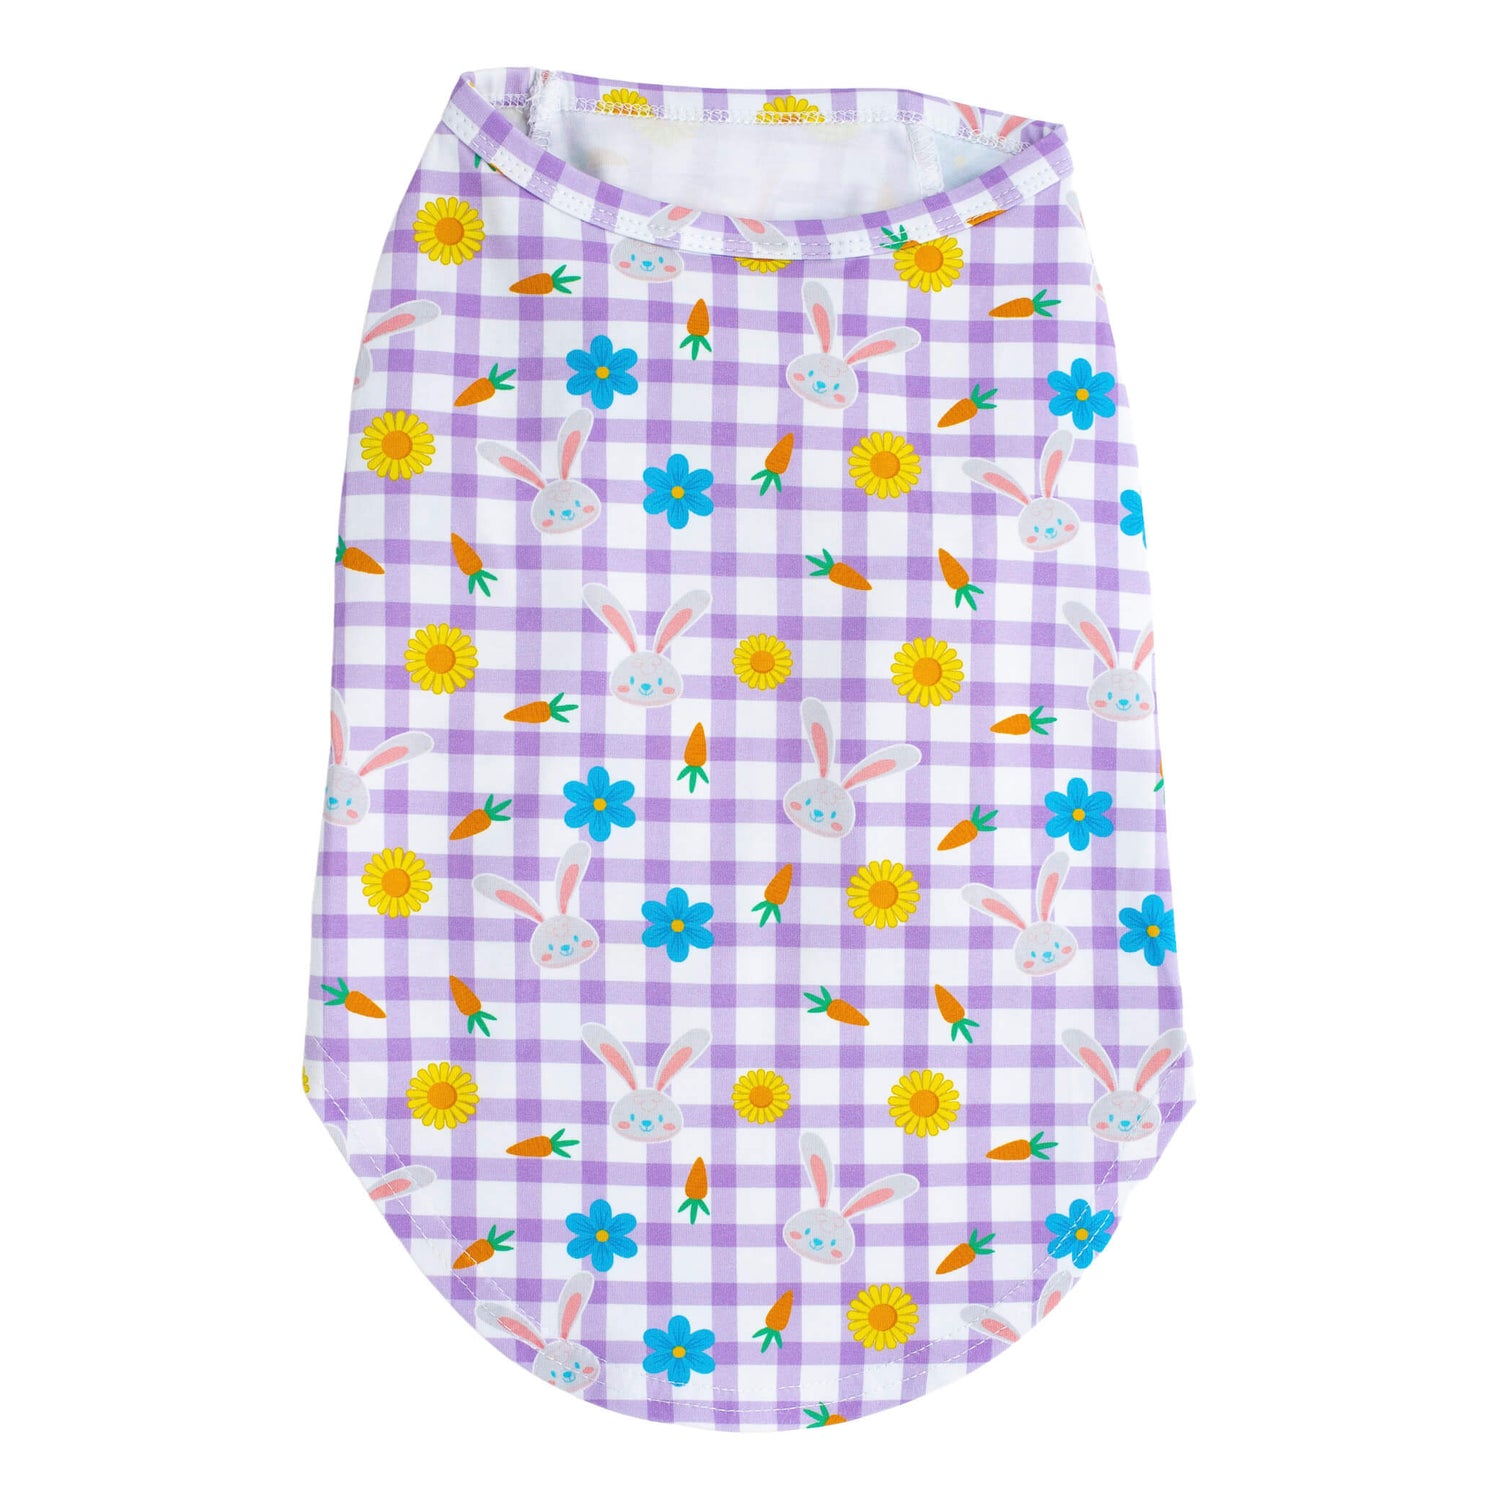 Back flat lay of Vibrant Hounds Hoppy Easter shirt for dogs. It has a purple gingham background with Easter bunnies, carrots, and sunflowers printed on the front.